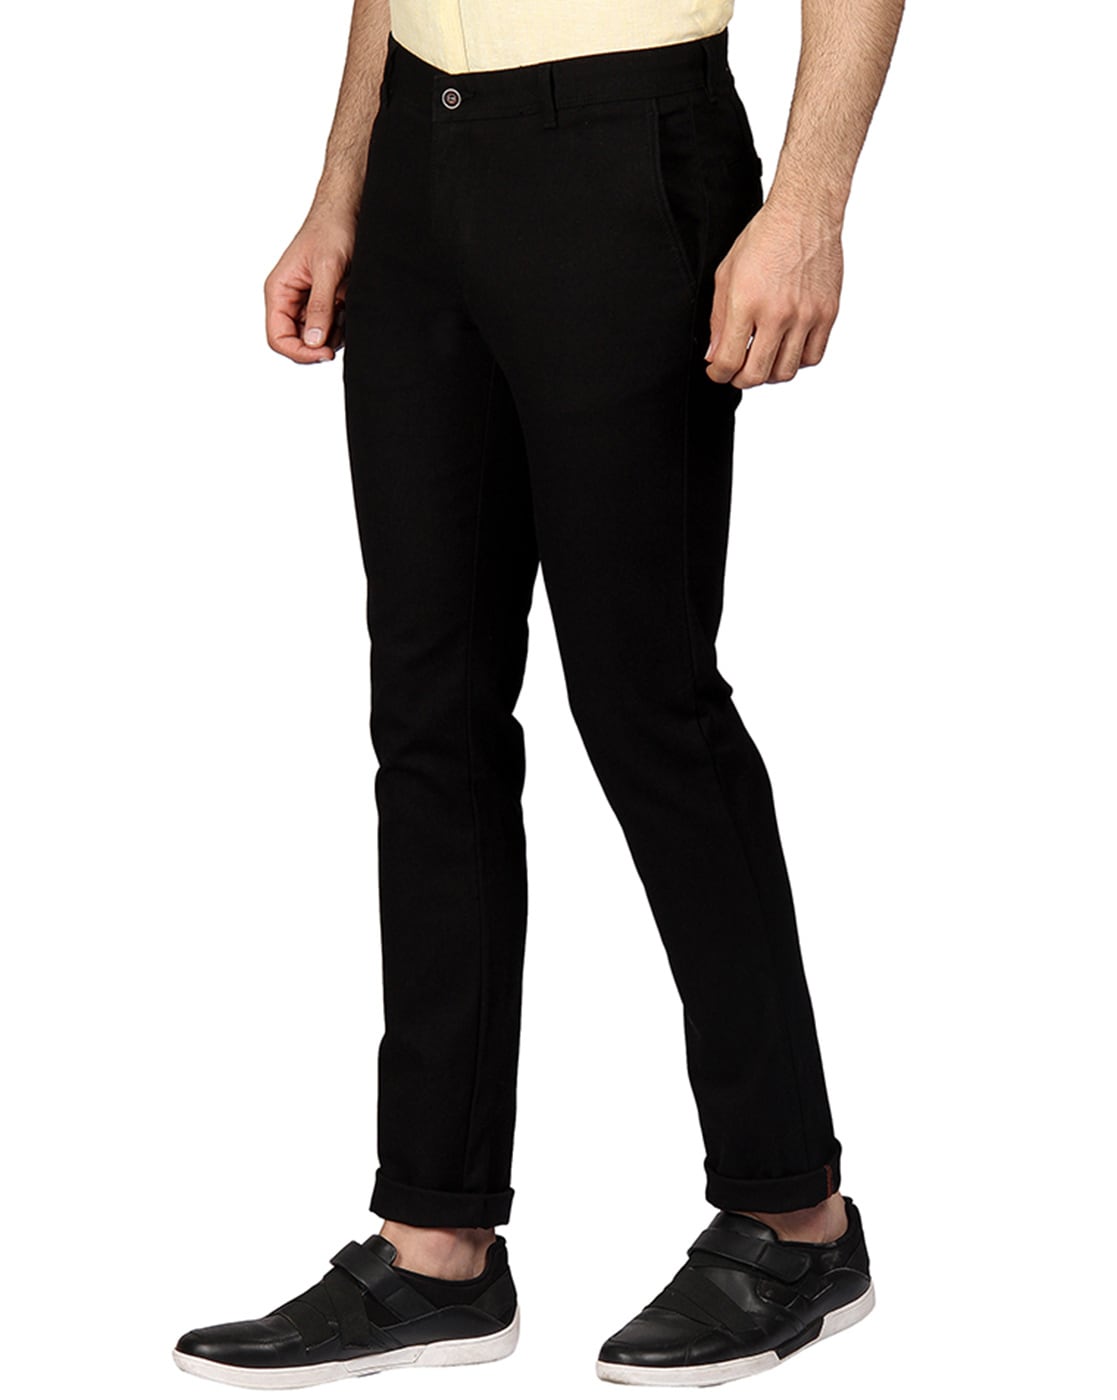 Share 90+ blackberry b95 fit trousers - in.cdgdbentre